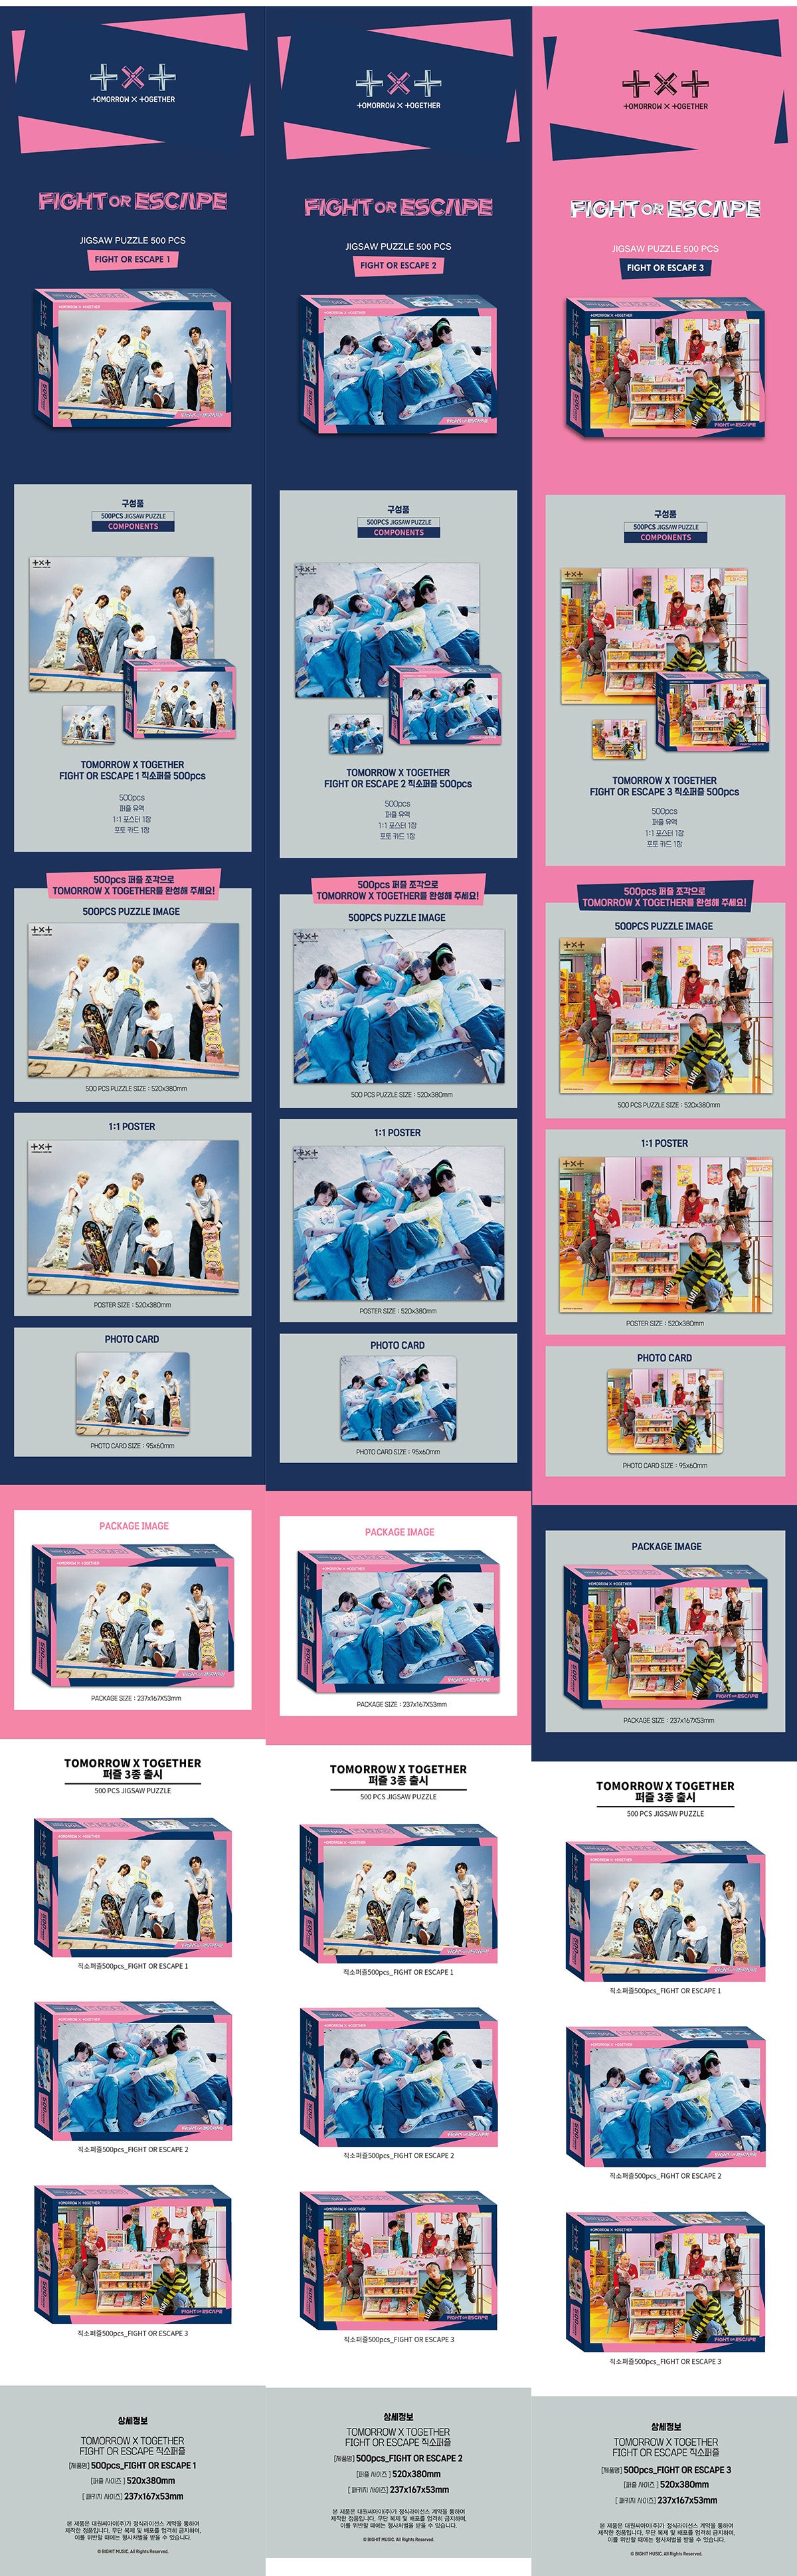 TOMORROW X TOGETHER  - Jigsaw puzzle 500pcs (3 versions)